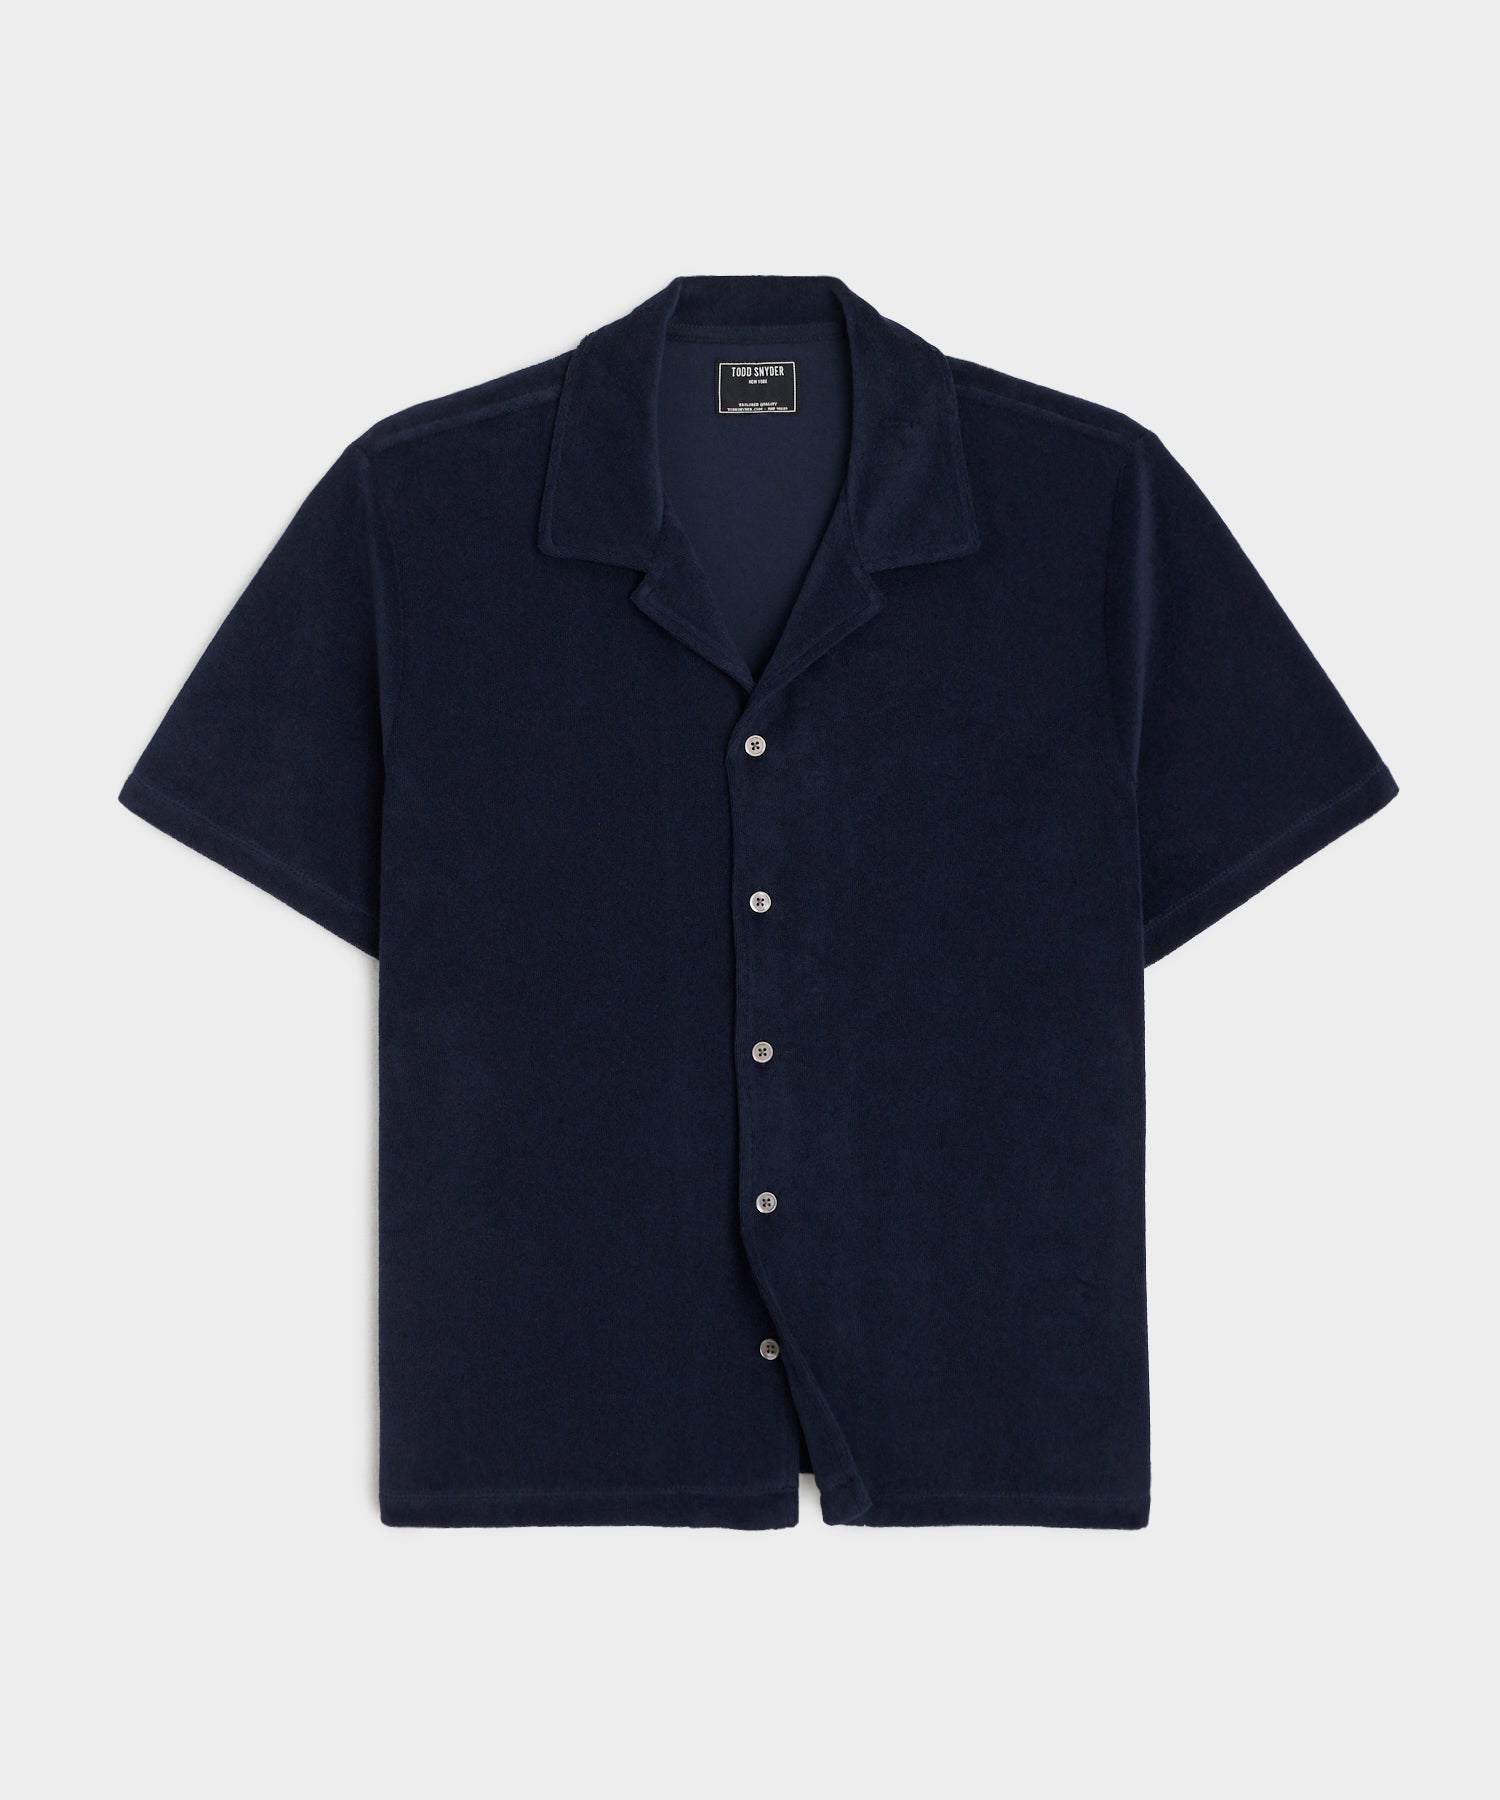 Terry Cabana Polo Shirt in Classic Navy